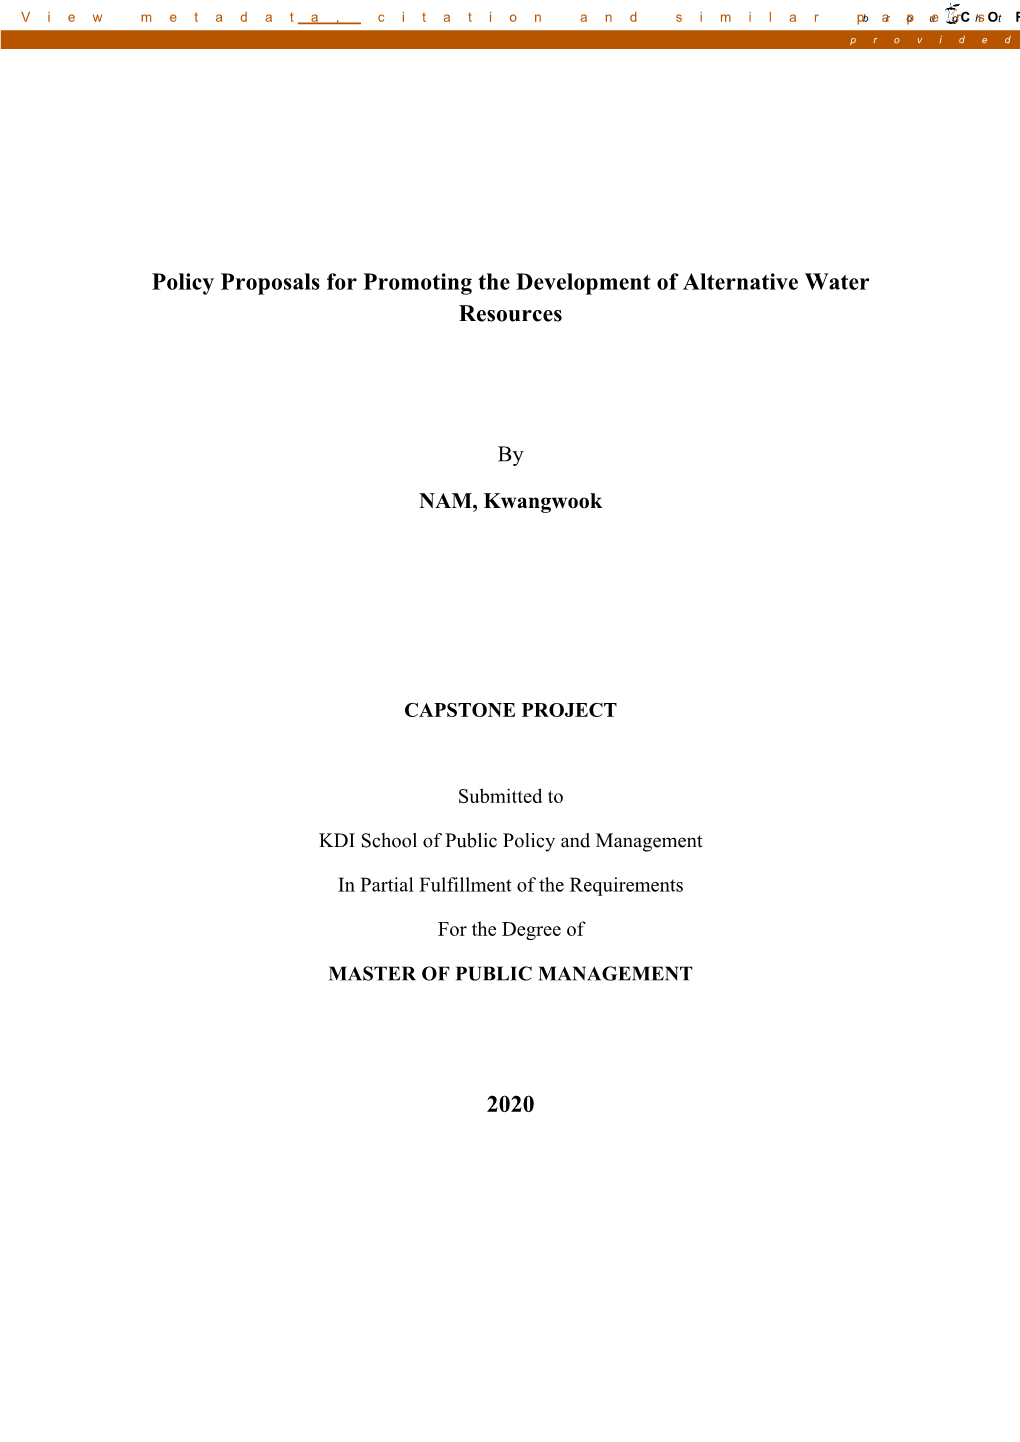 Policy Proposals for Promoting the Development of Alternative Water Resources